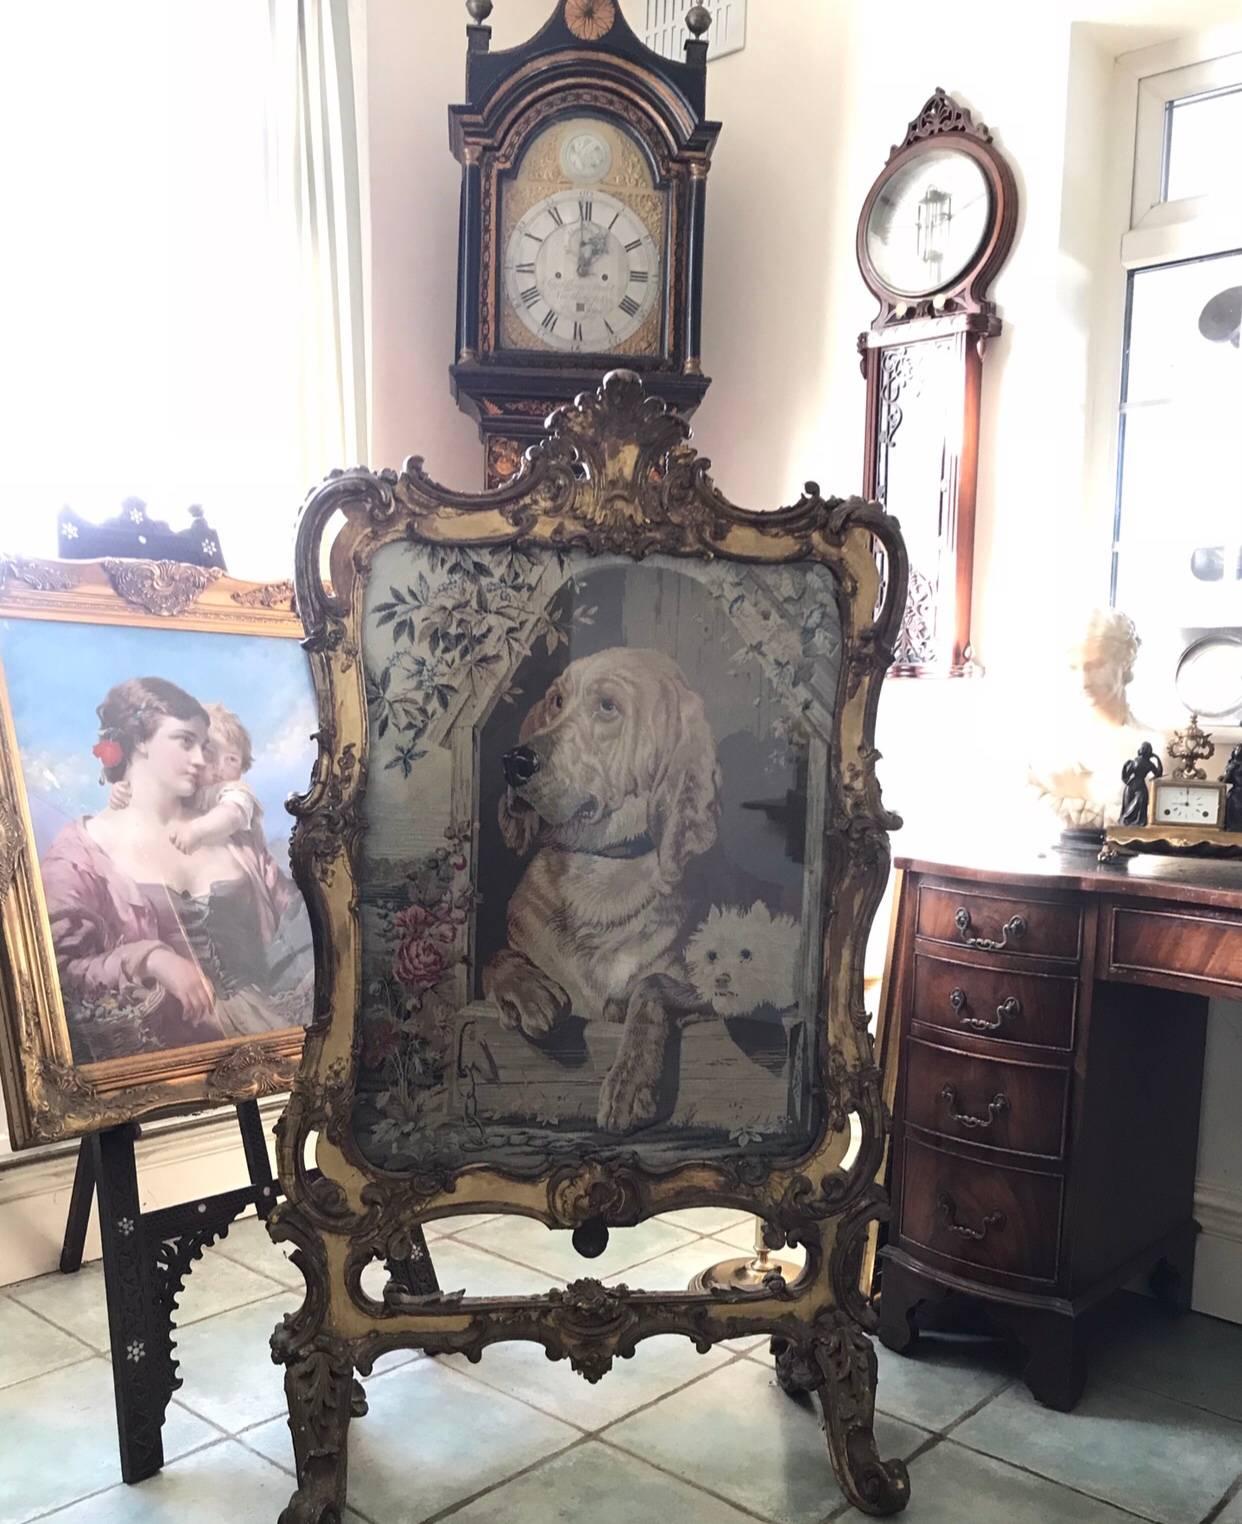 Huge Regency Period Giltwood Tapestry Fire Screen In Fair Condition For Sale In Keyston, GB